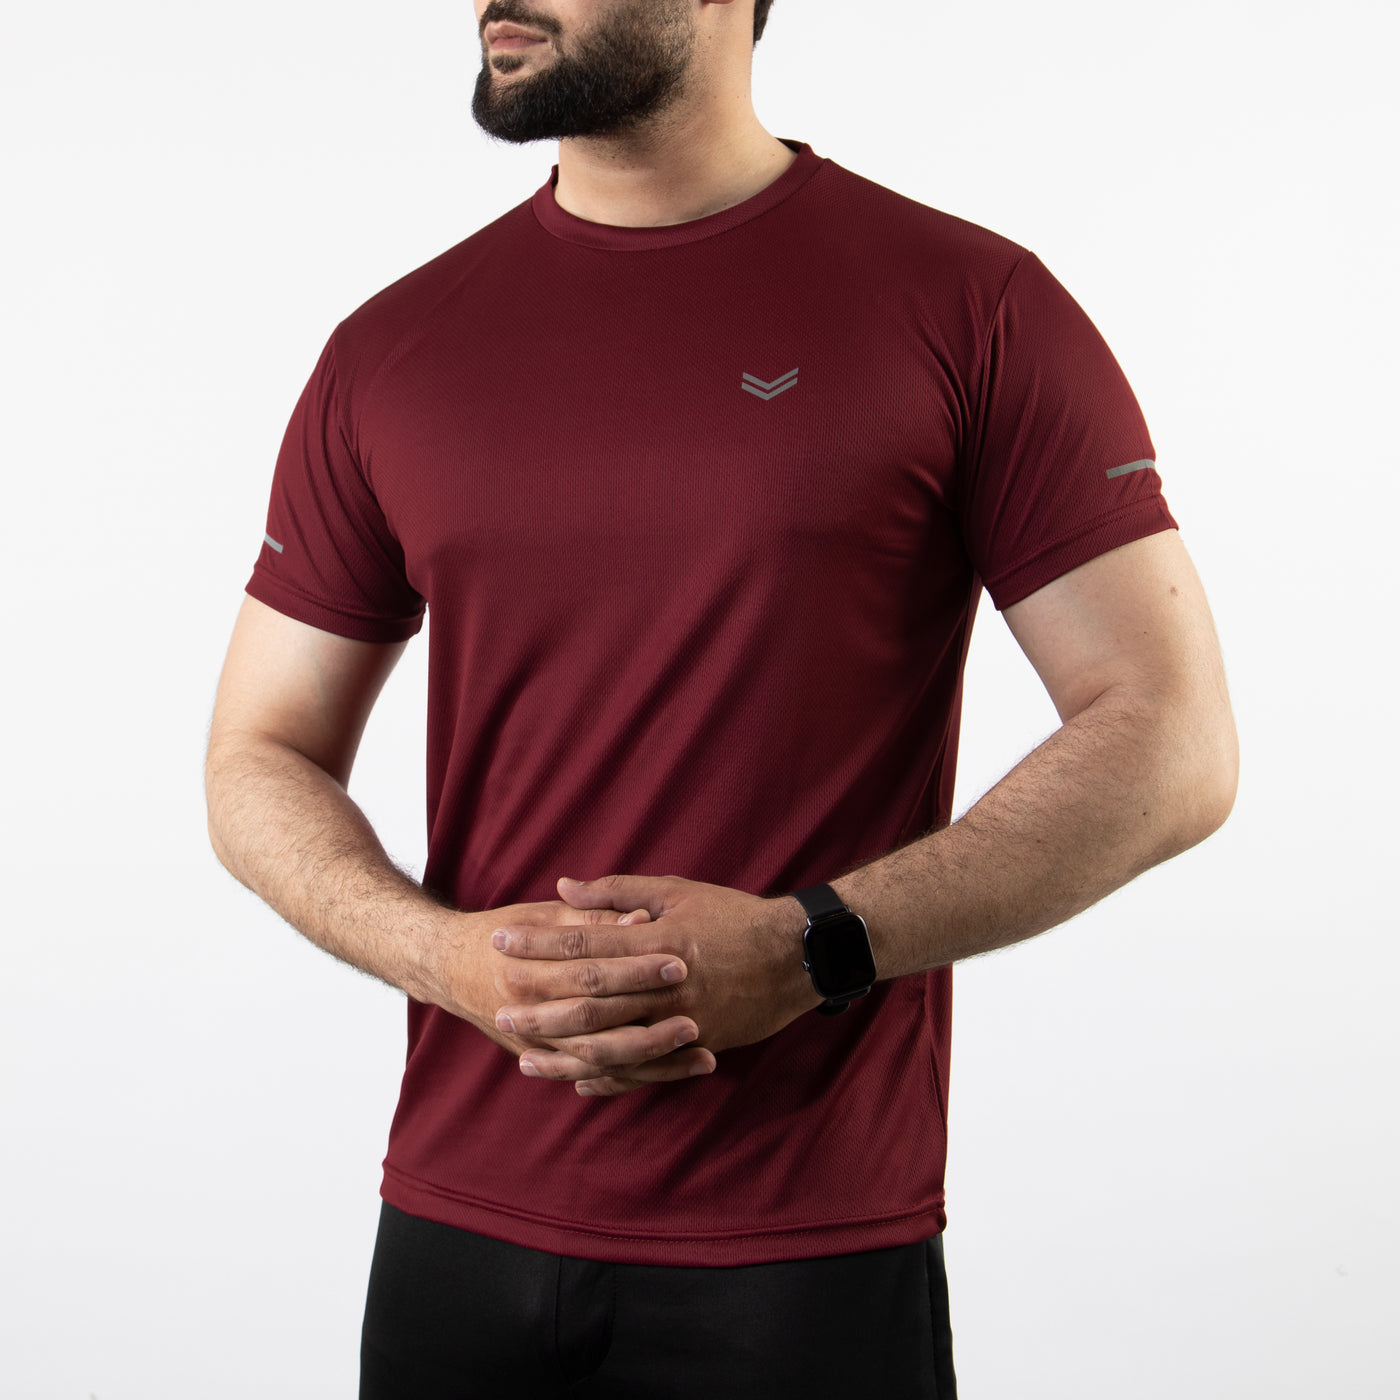 Maroon Mesh Quick Dry T-Shirt With Reflective Detailing